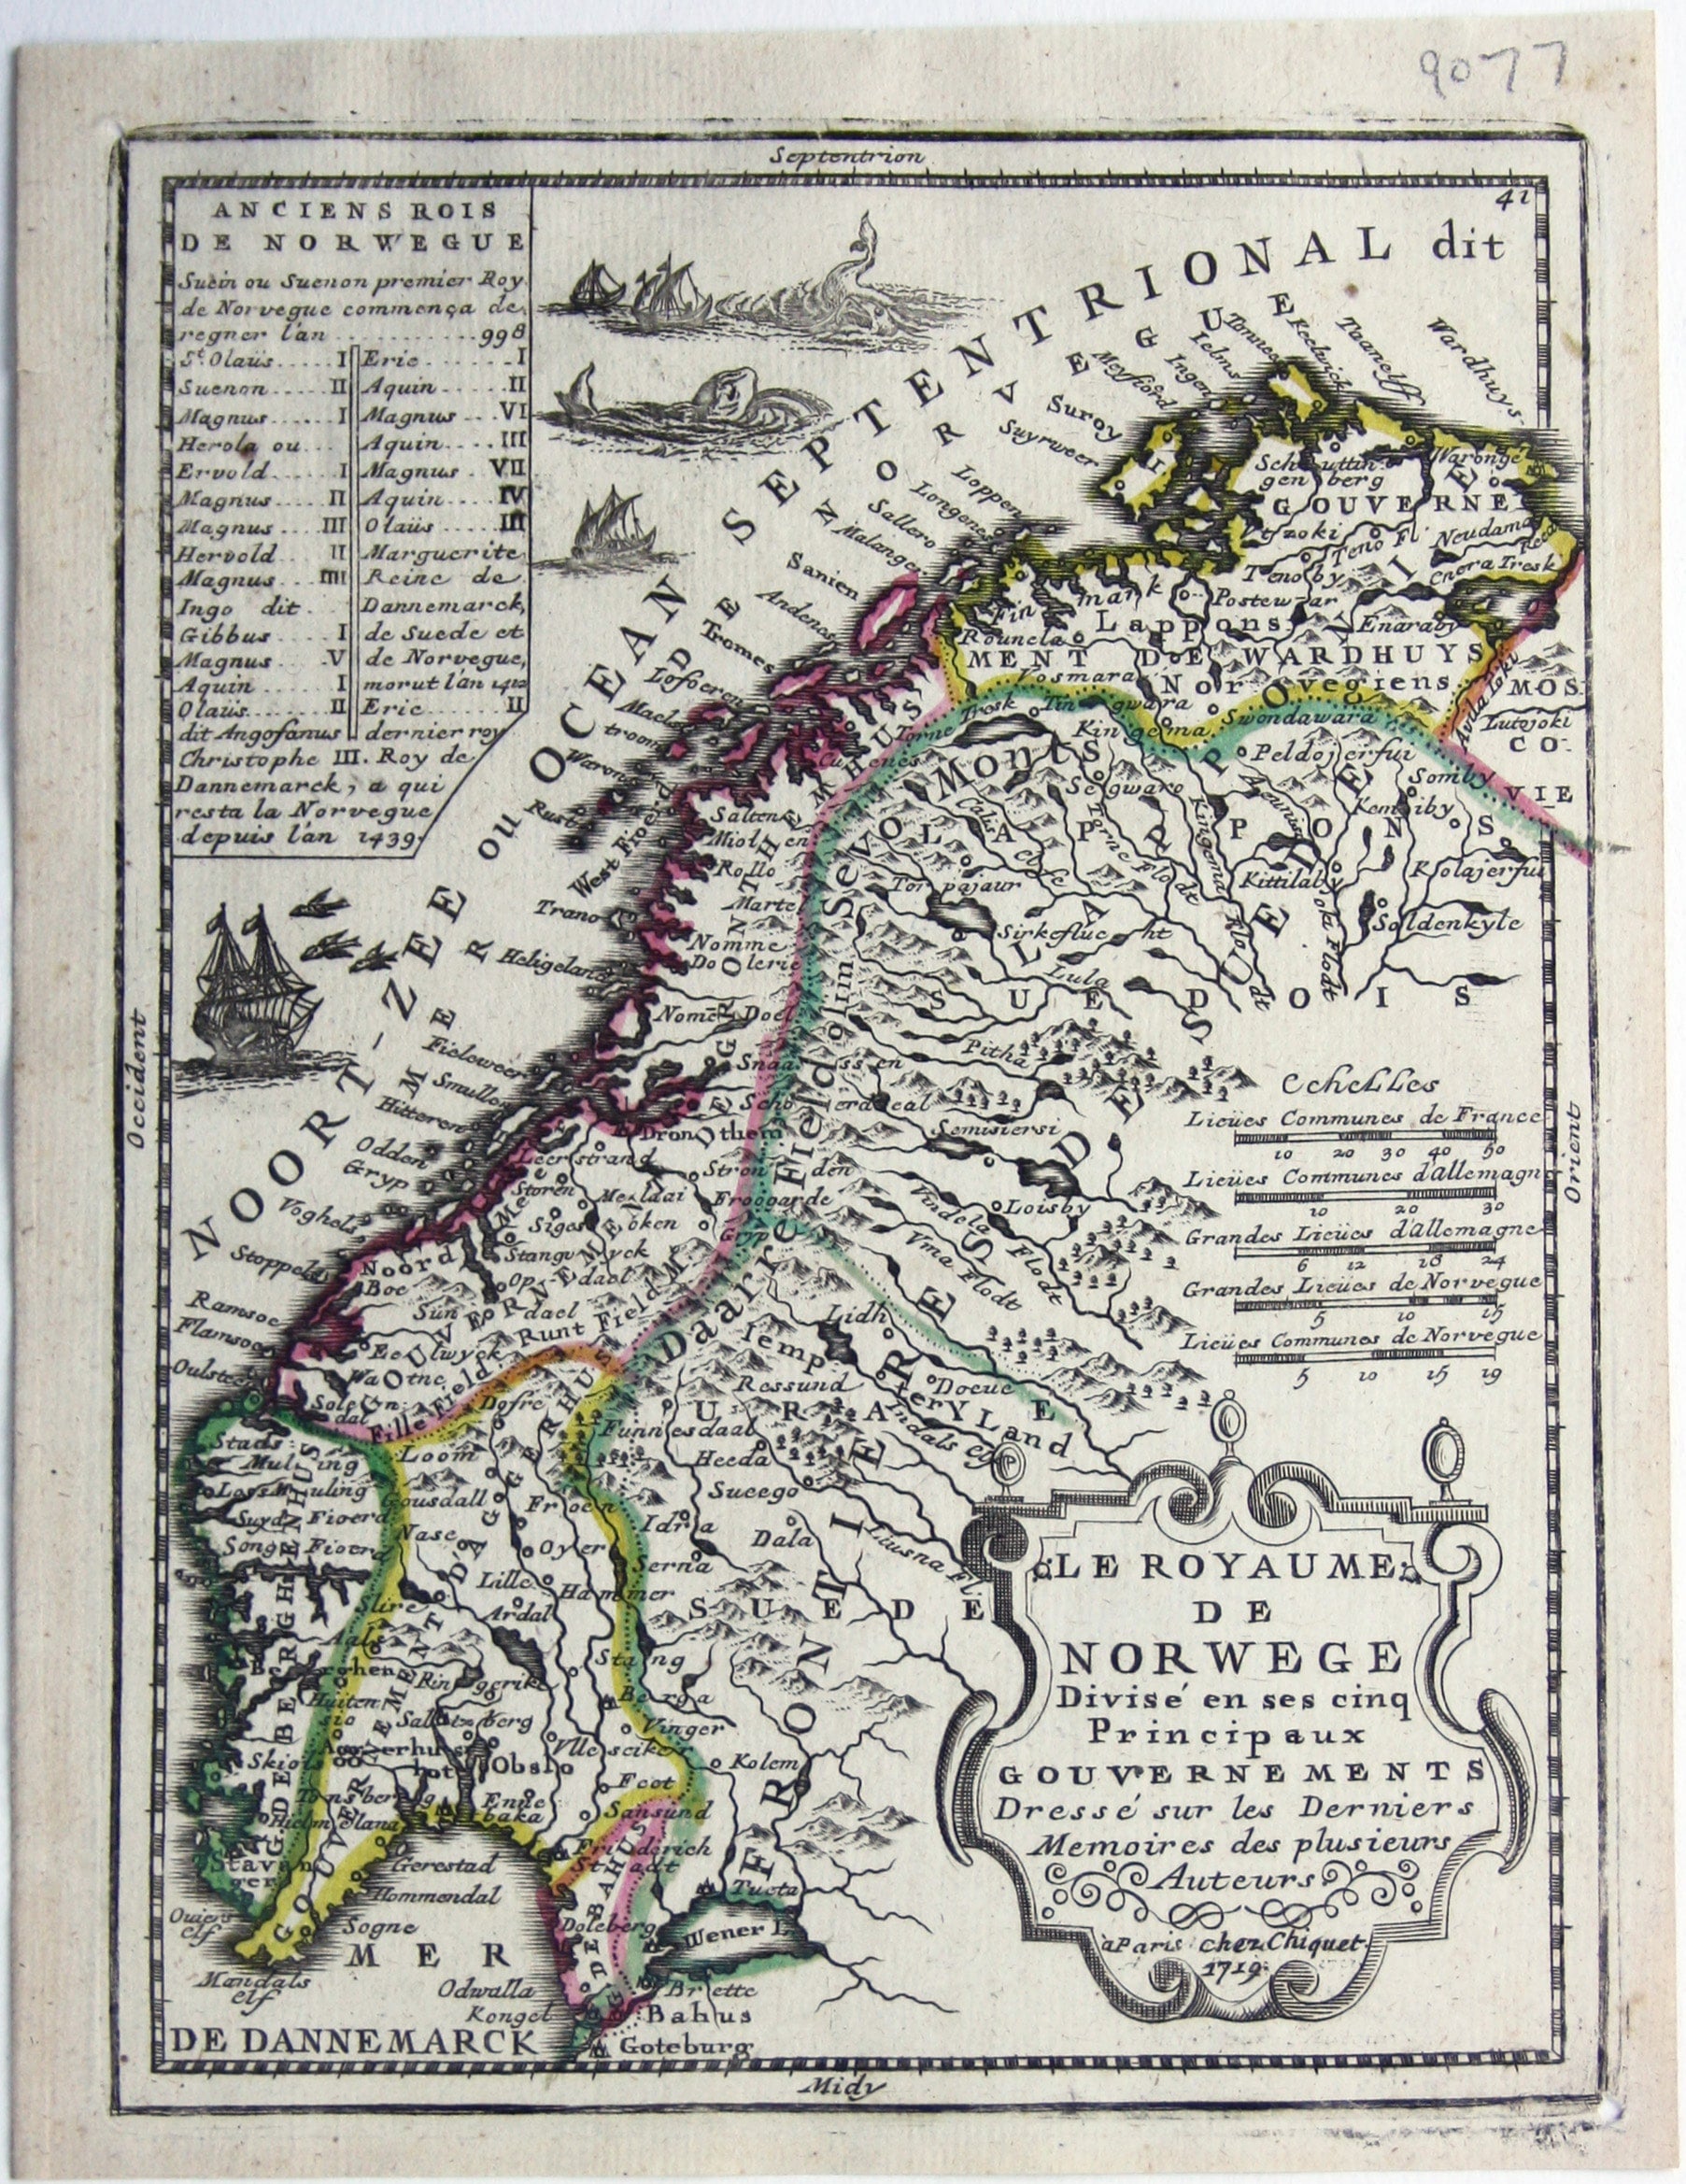 Chiquet’s Map of Norway